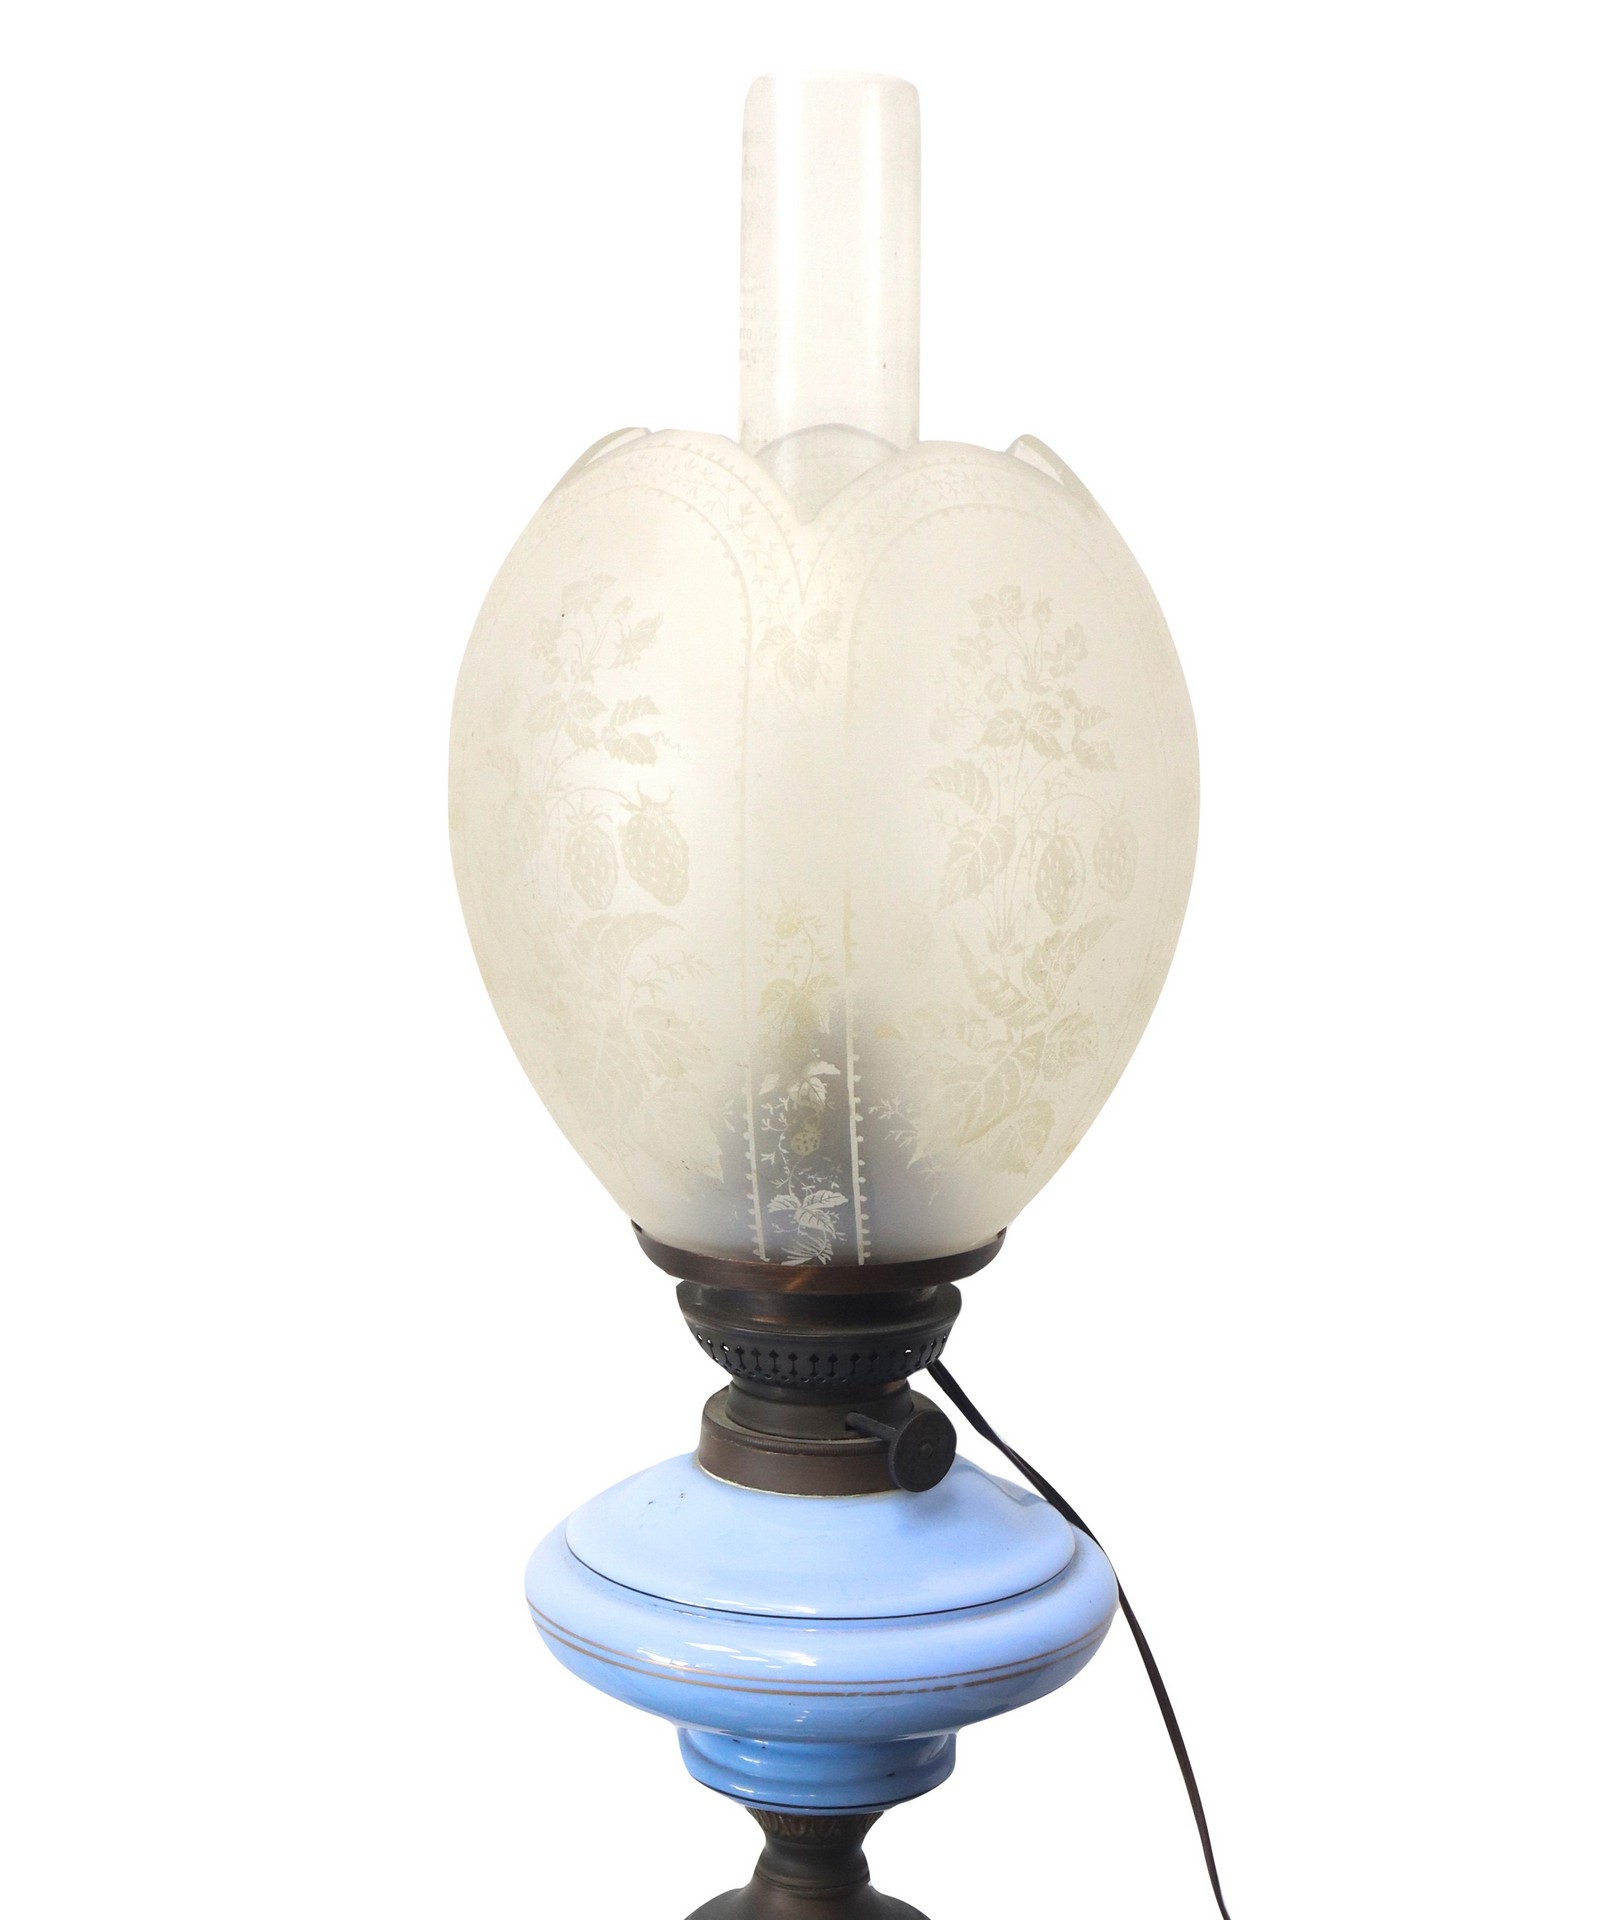 Lamp in shades of blue with floral decoration, Early 20th century - Image 4 of 4